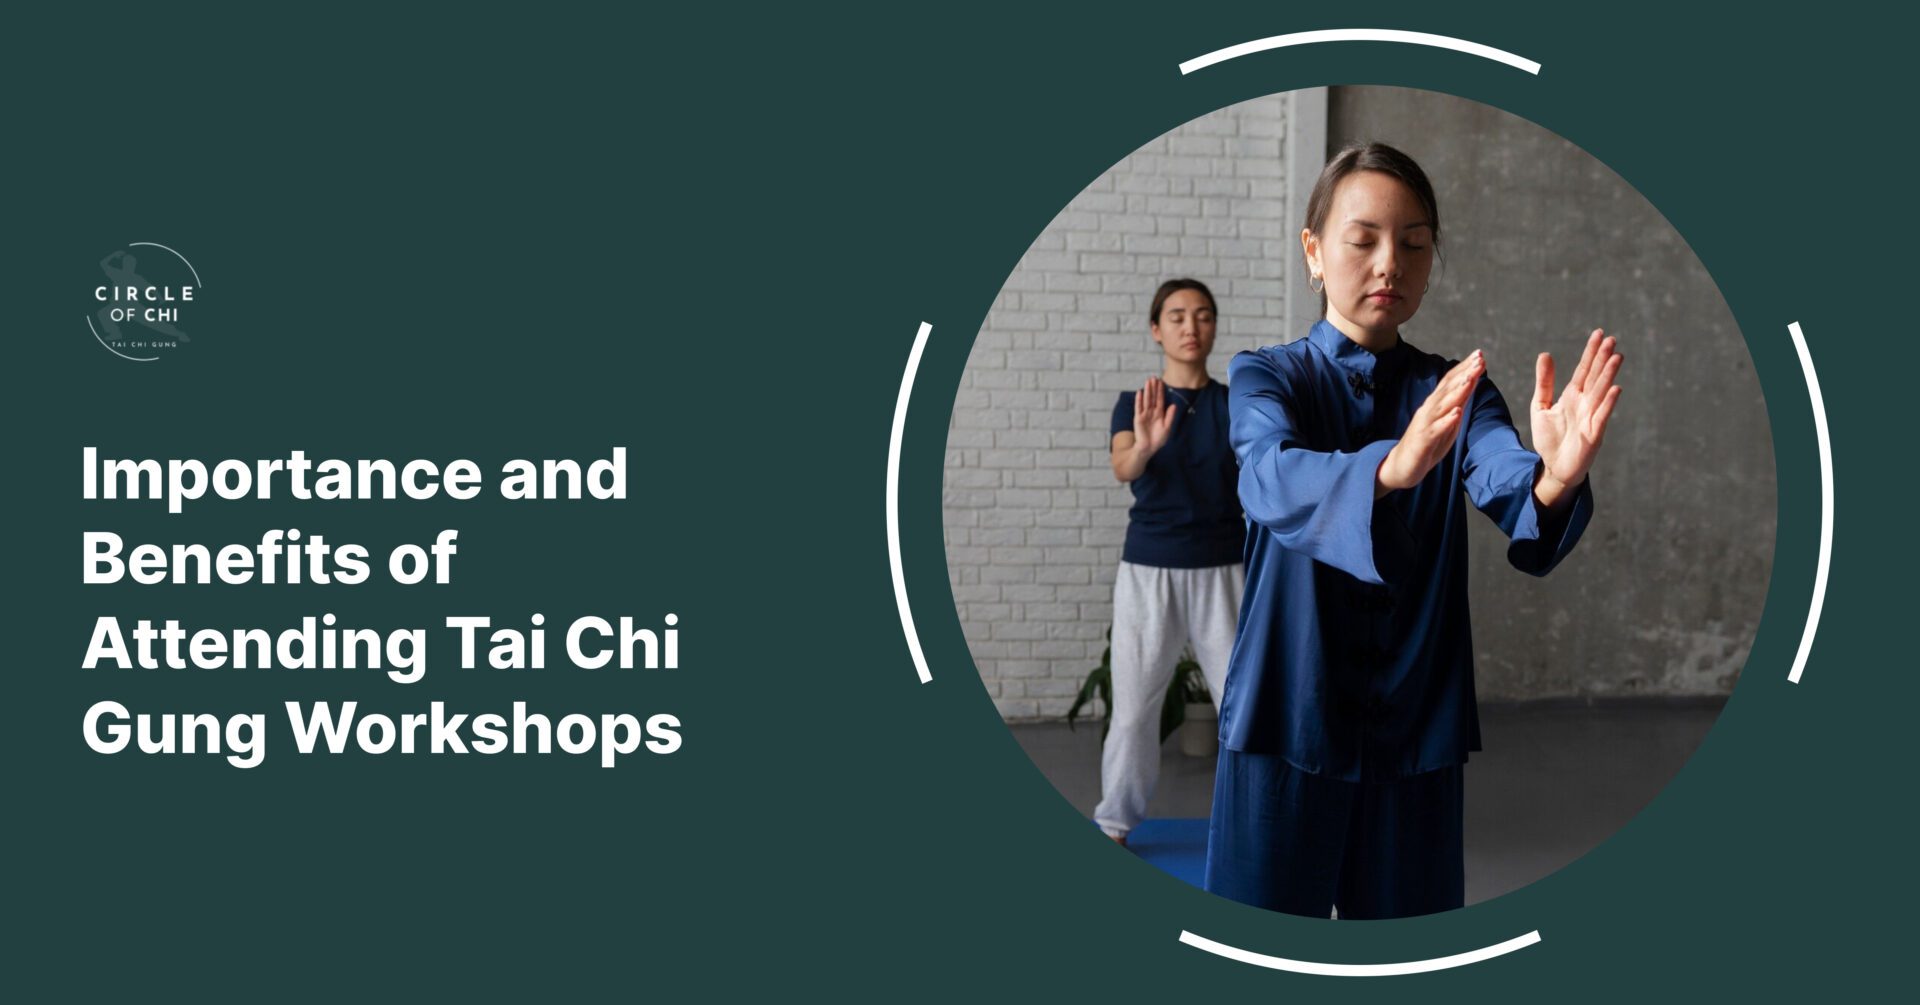 Importance and Benefits of Attending Tai Chi Gung Workshops